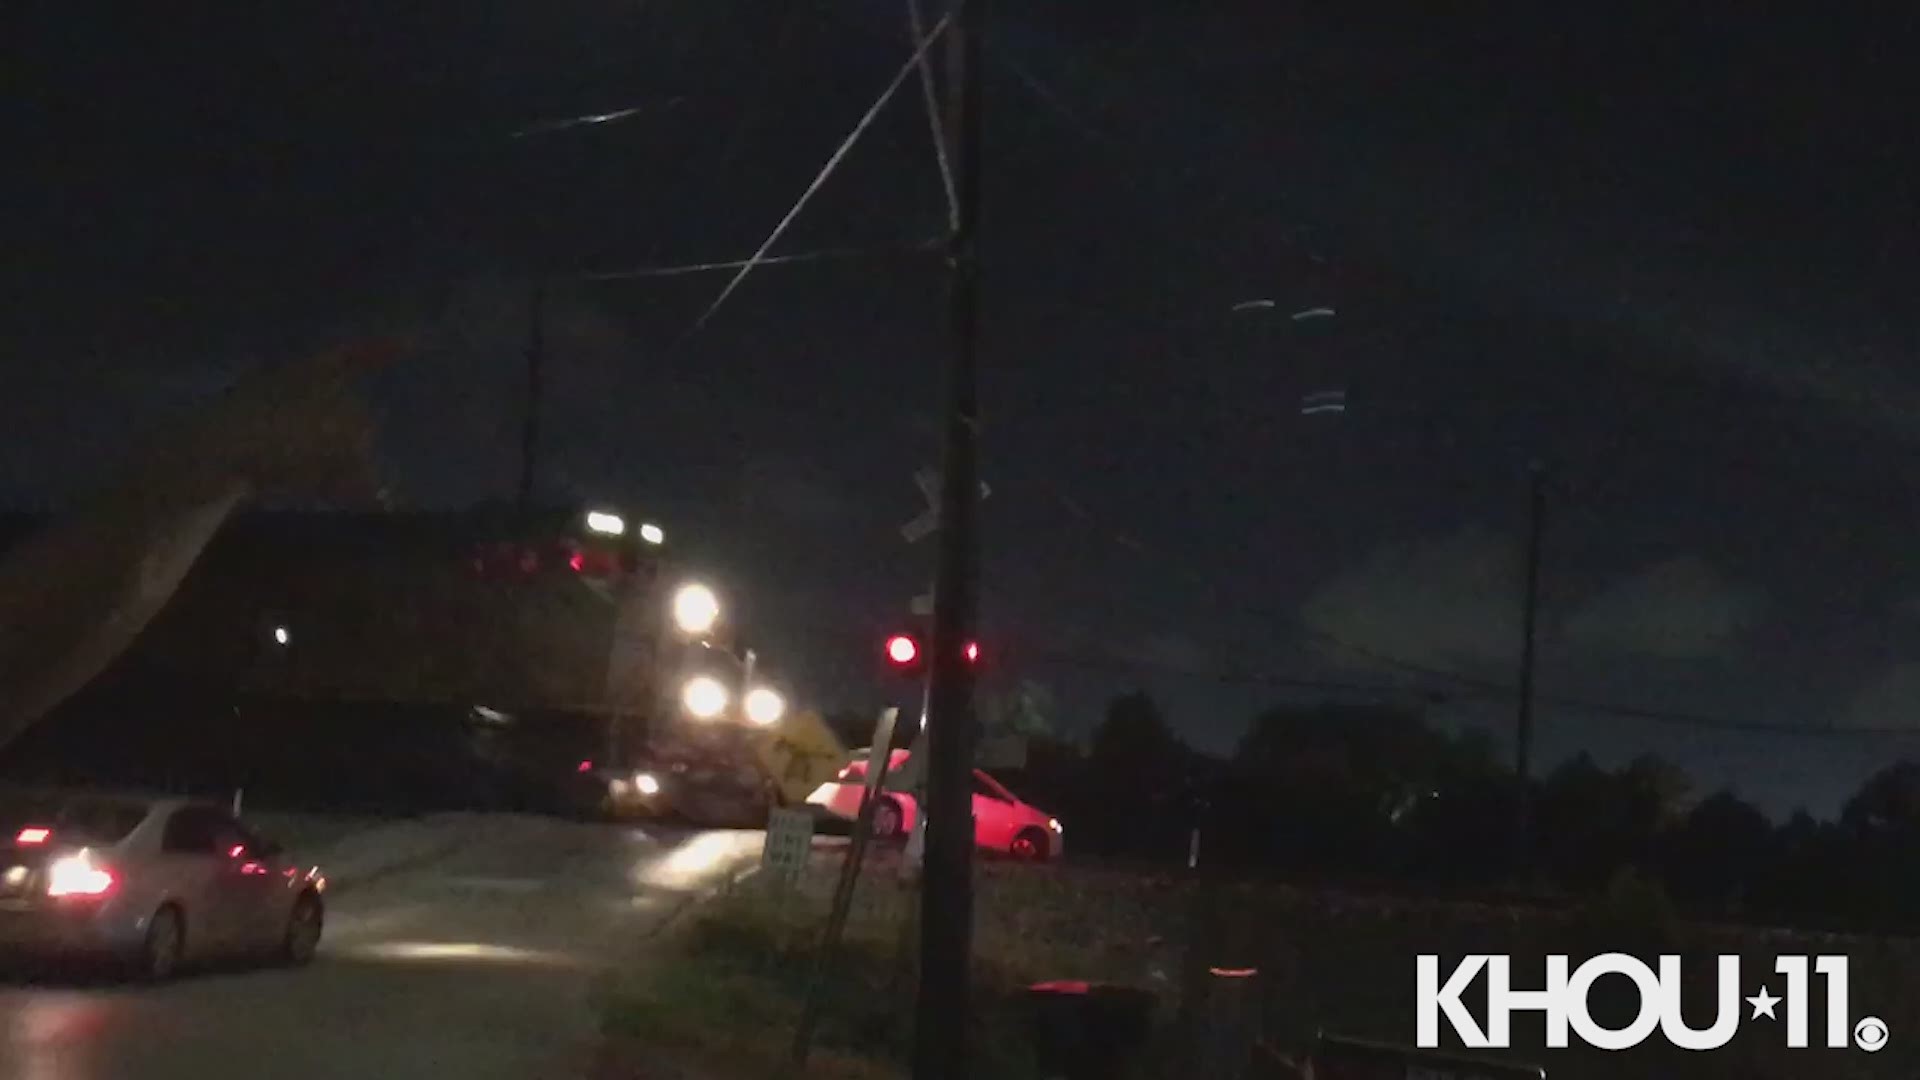 A car was hit by a train near Memorial Park. Thankfully, no one was in the car.